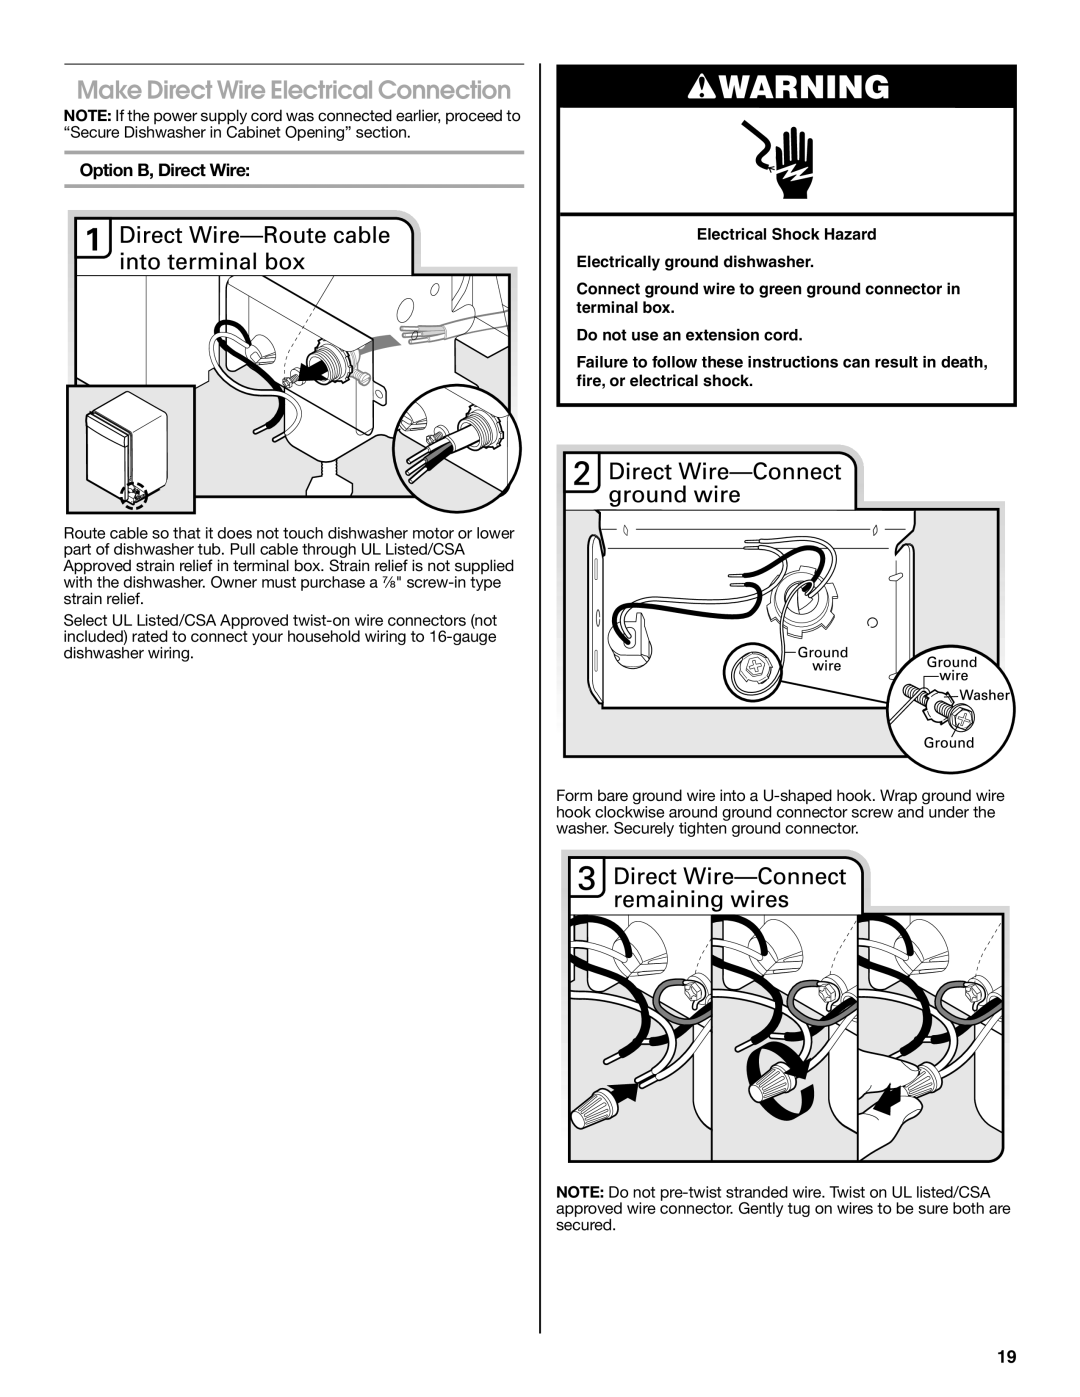 Whirlpool W10435039A Make Direct Wire Electrical Connection, Option B, Direct Wire, Do not use an extension cord 